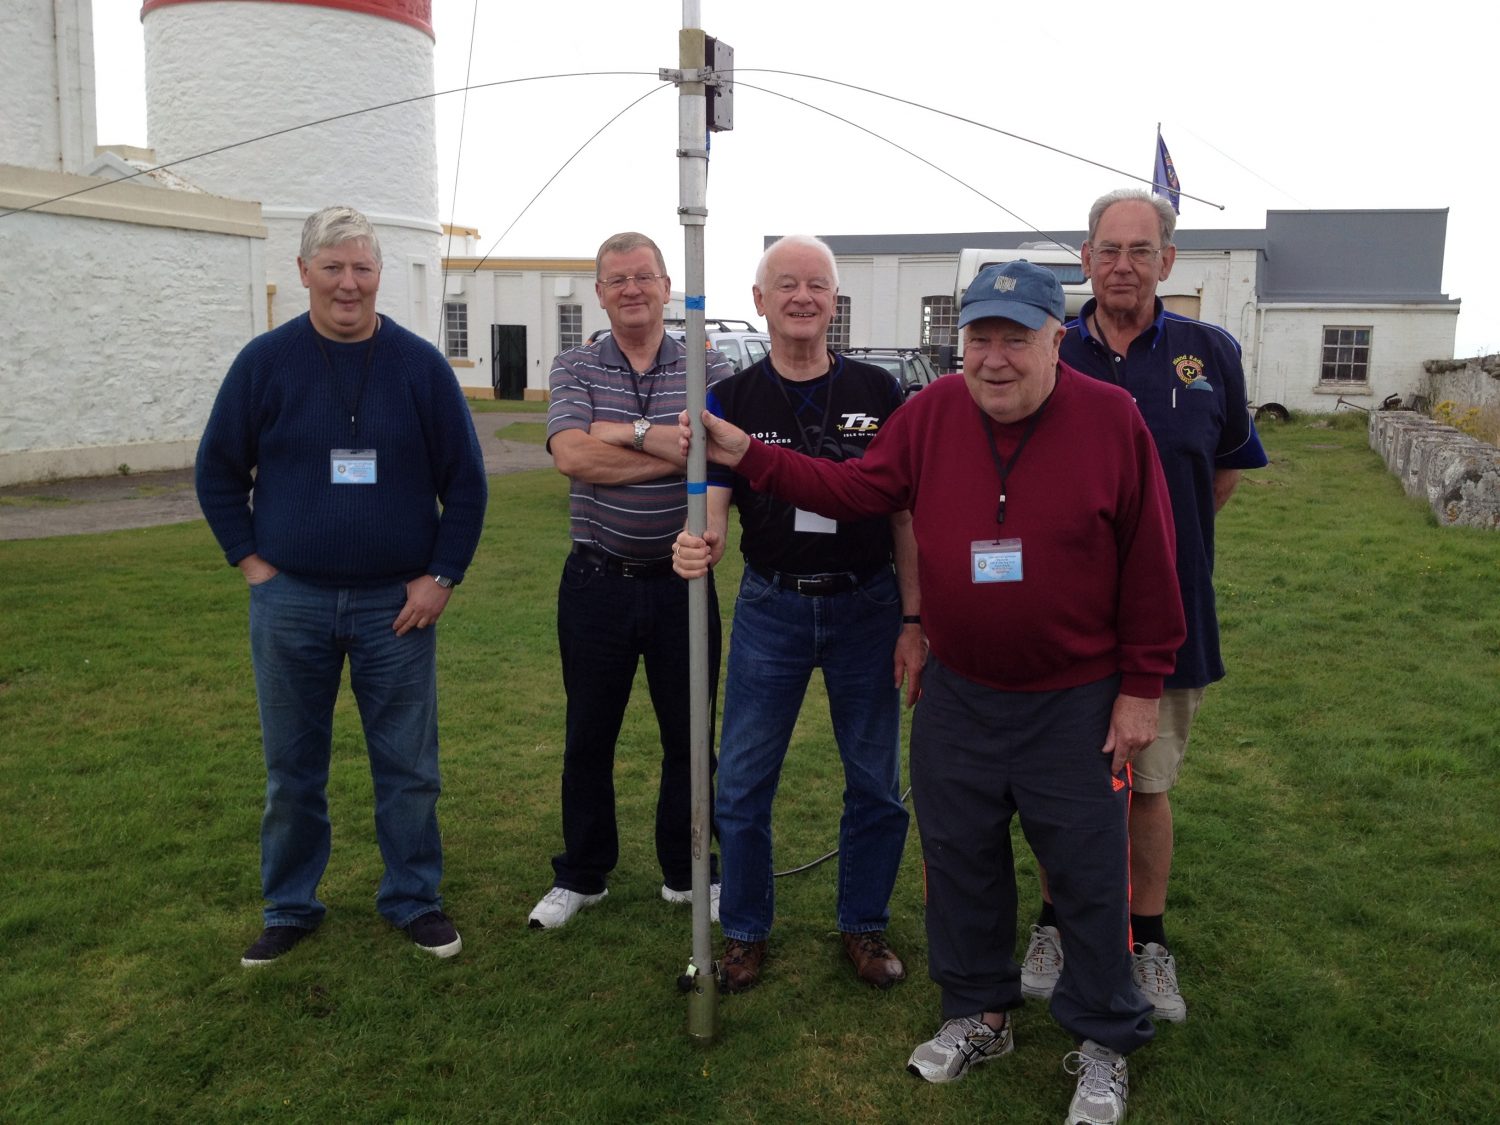 Lighthouses on the Air from 2012 with 2 Unknowns,John Butler (GD)NFN), Brian Brough (GD4PTV) and Mike Jones (GD4WBY)